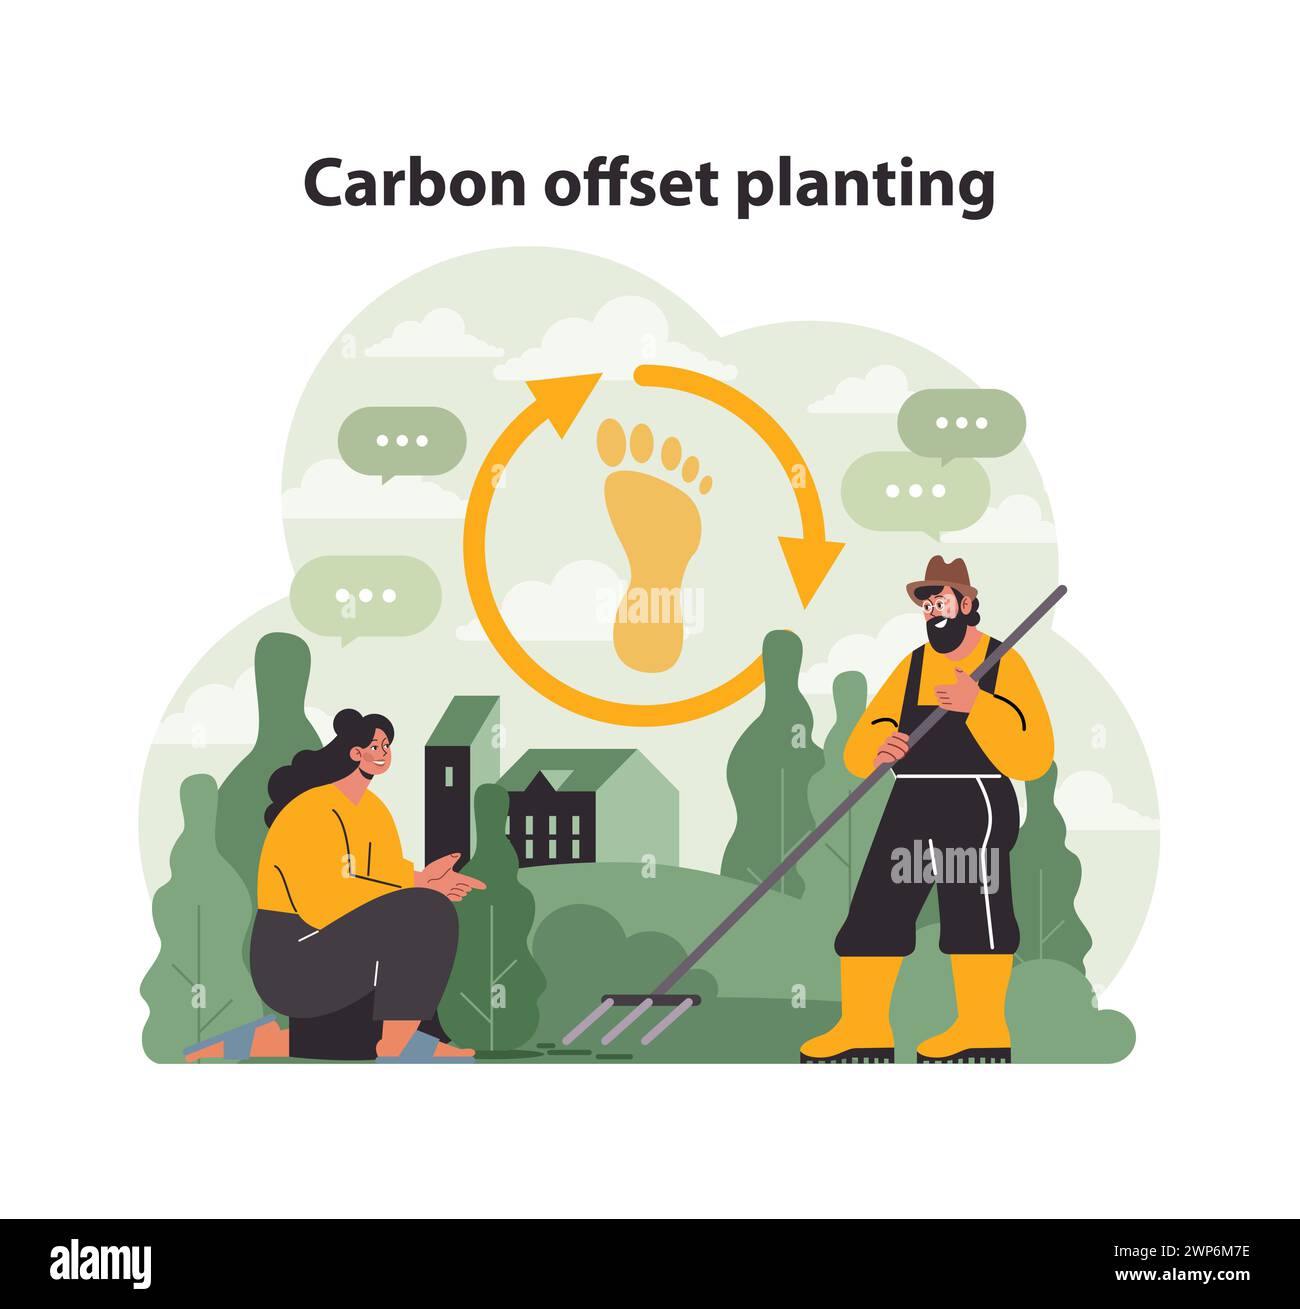 Two individuals promote carbon offset planting. Footprint in a cycle represents eco balance. Gardening for a greener planet near urban structures. Flat vector illustration Stock Vector